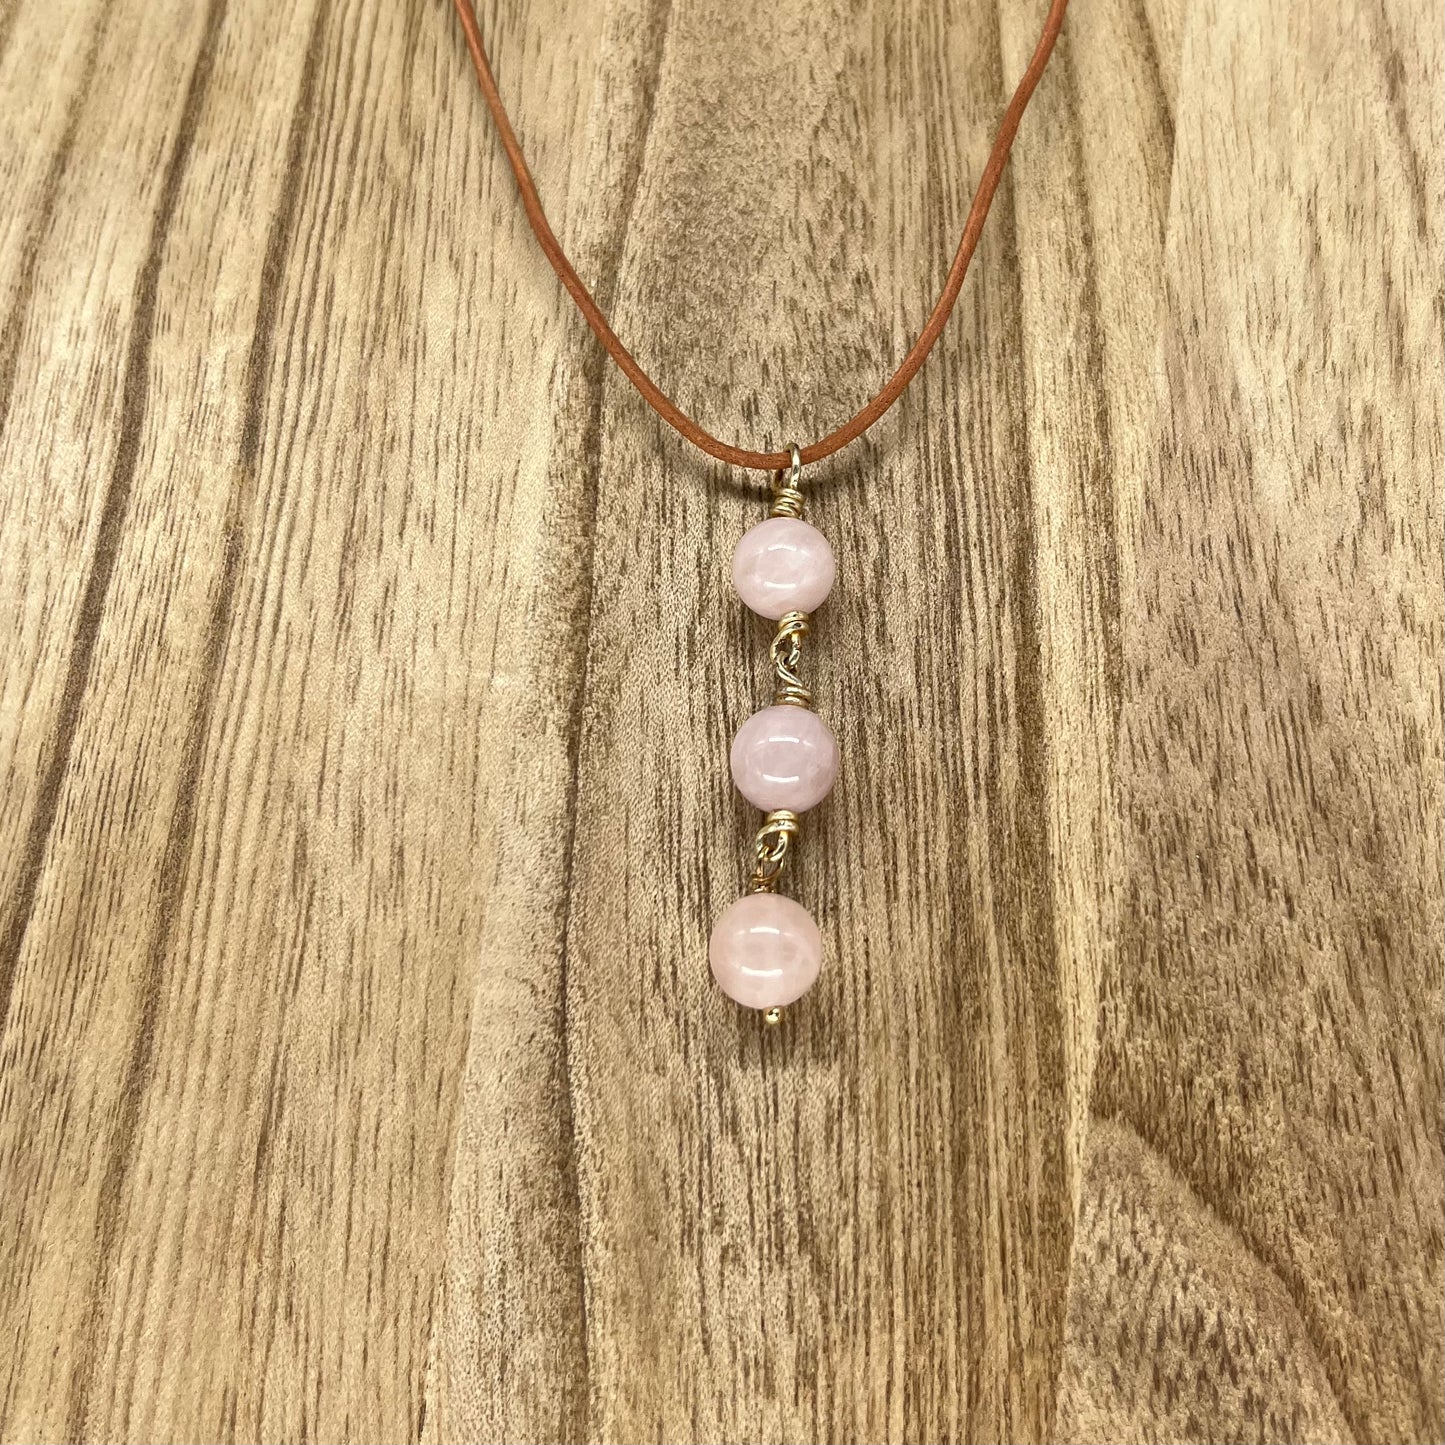 Rose Quartz Necklace on an Adjustable Leather Cord